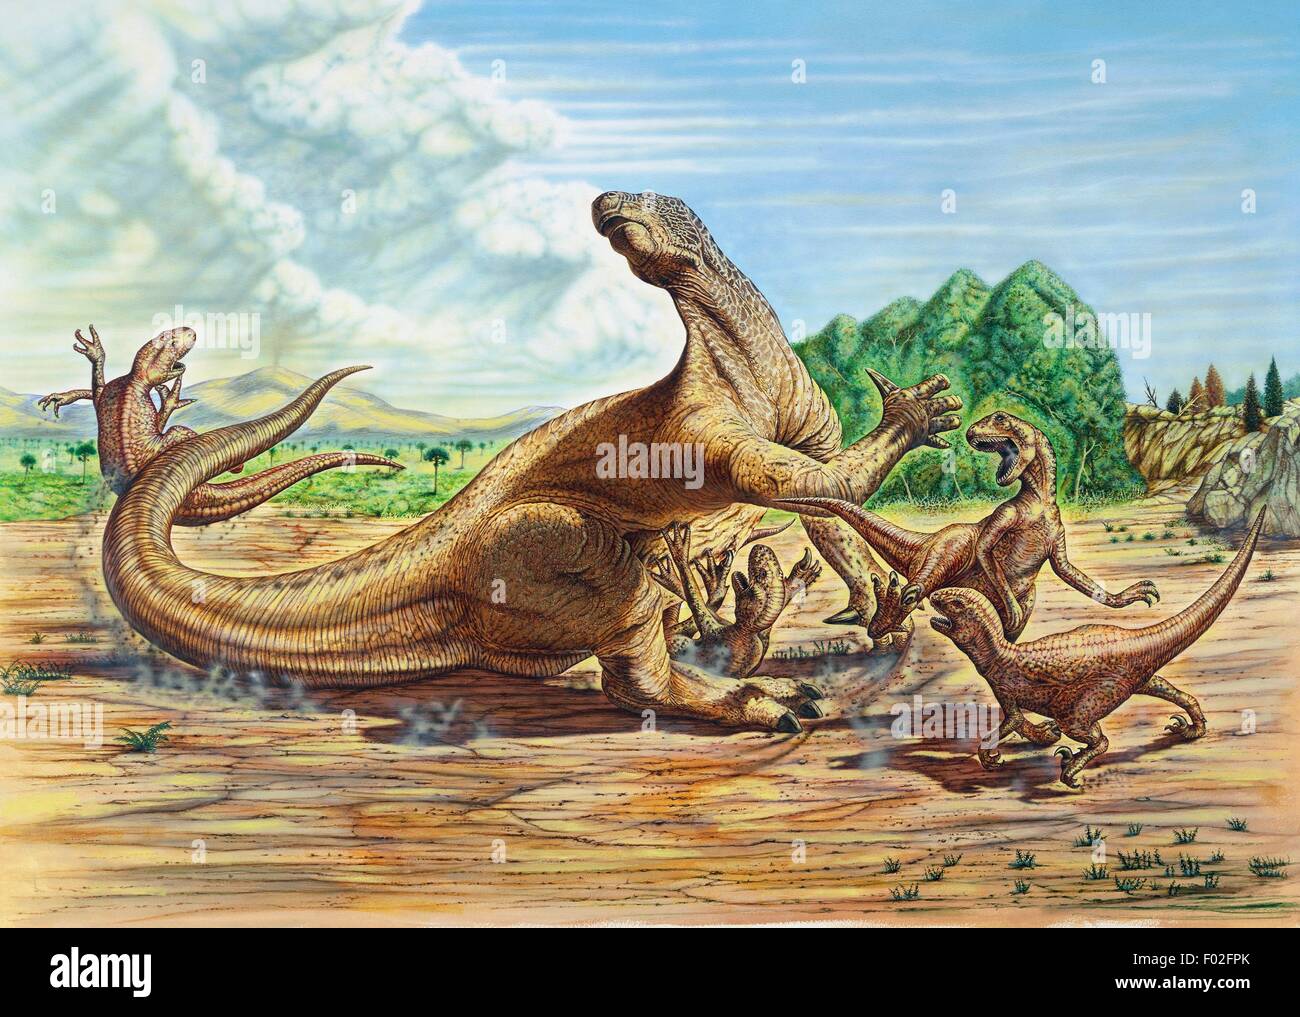 Iguanodon sp, Iguanodontidae, attacked by small carnivorous dinosaurs, Early Cretaceous. Artwork by Neil Lloyd. Stock Photo